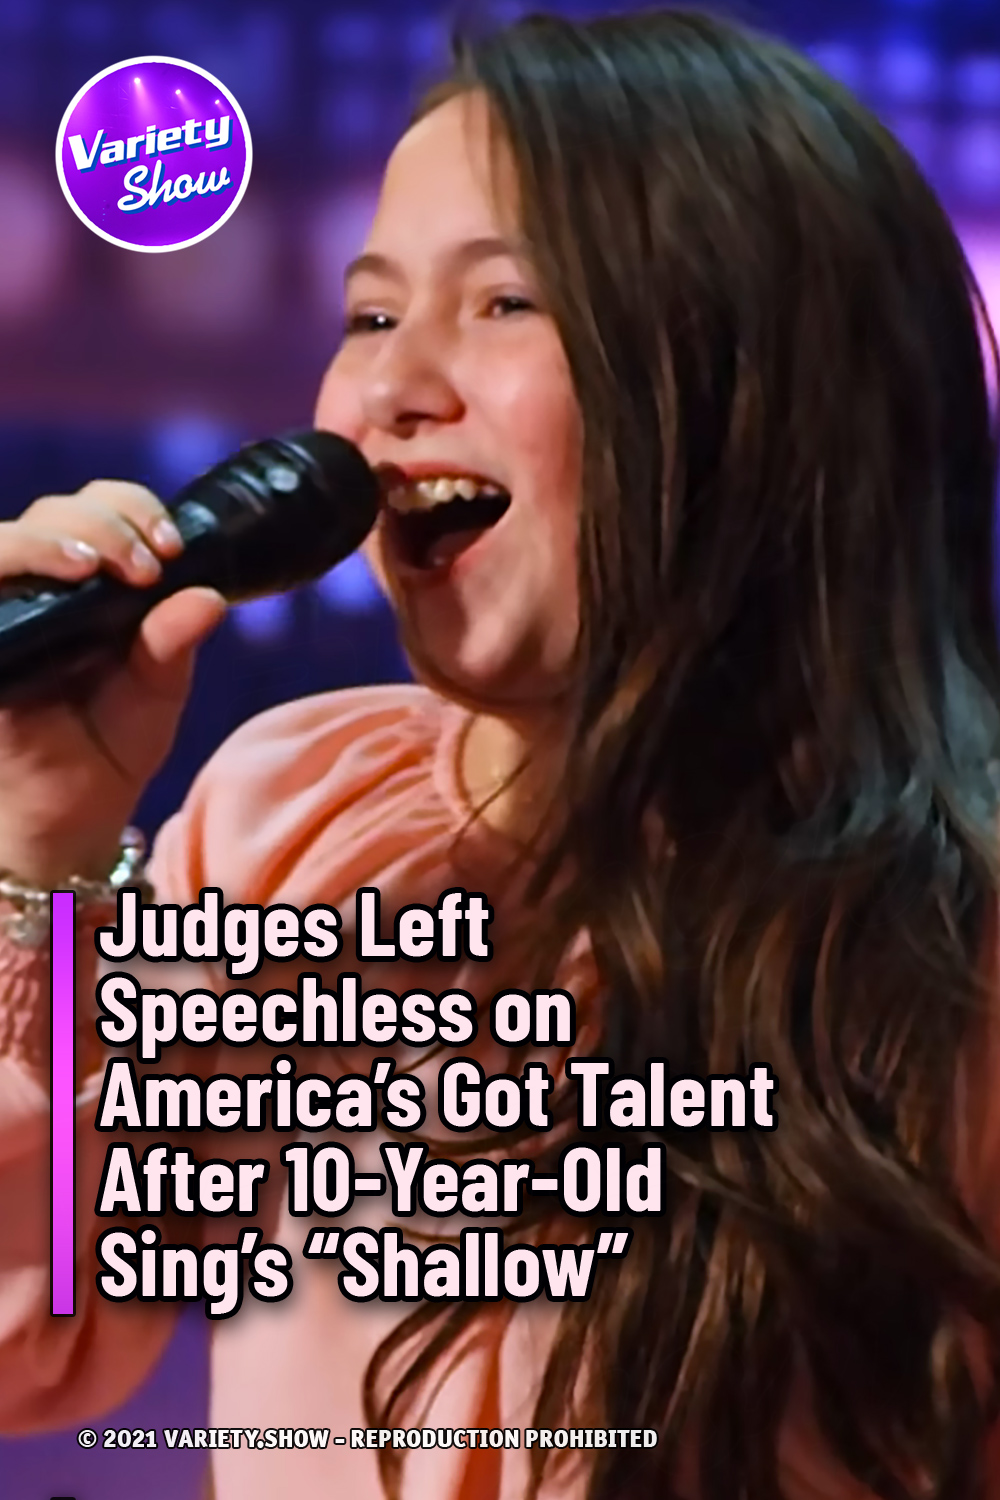 Judges Left Speechless on America’s Got Talent After 10-Year-Old Sing’s “Shallow”